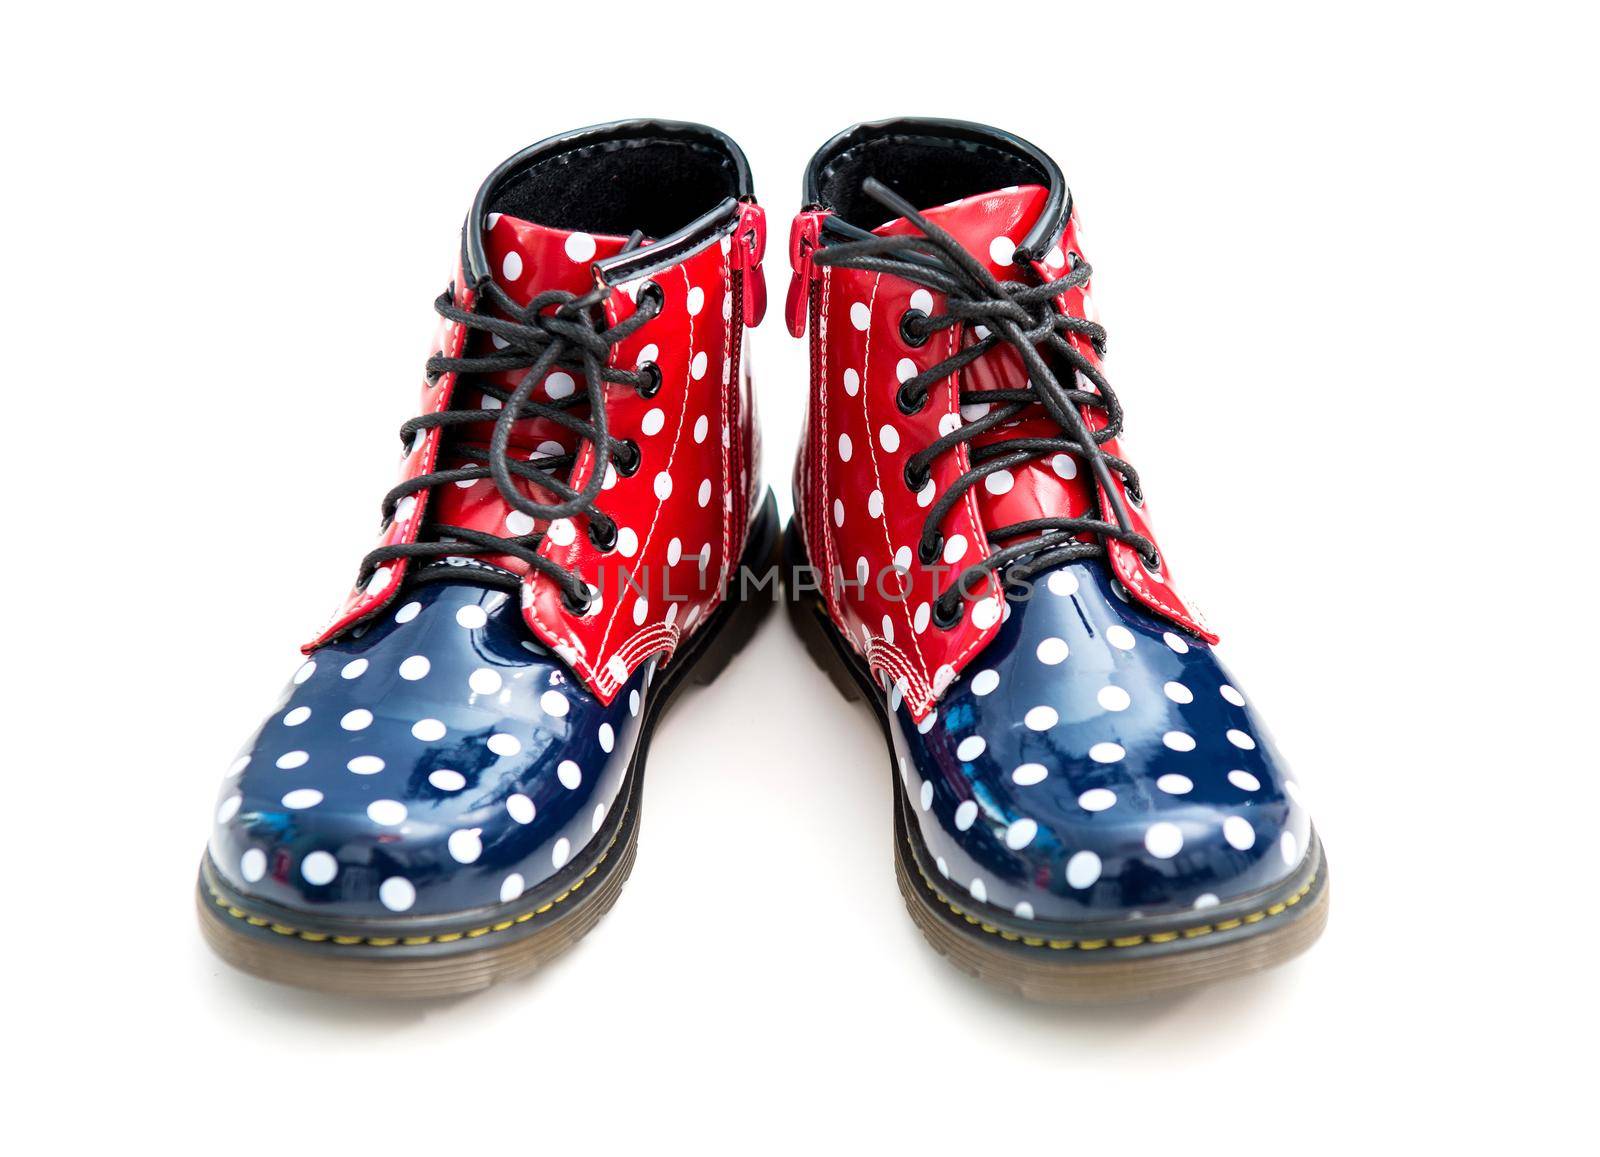 funny boots with polka dots by tan4ikk1